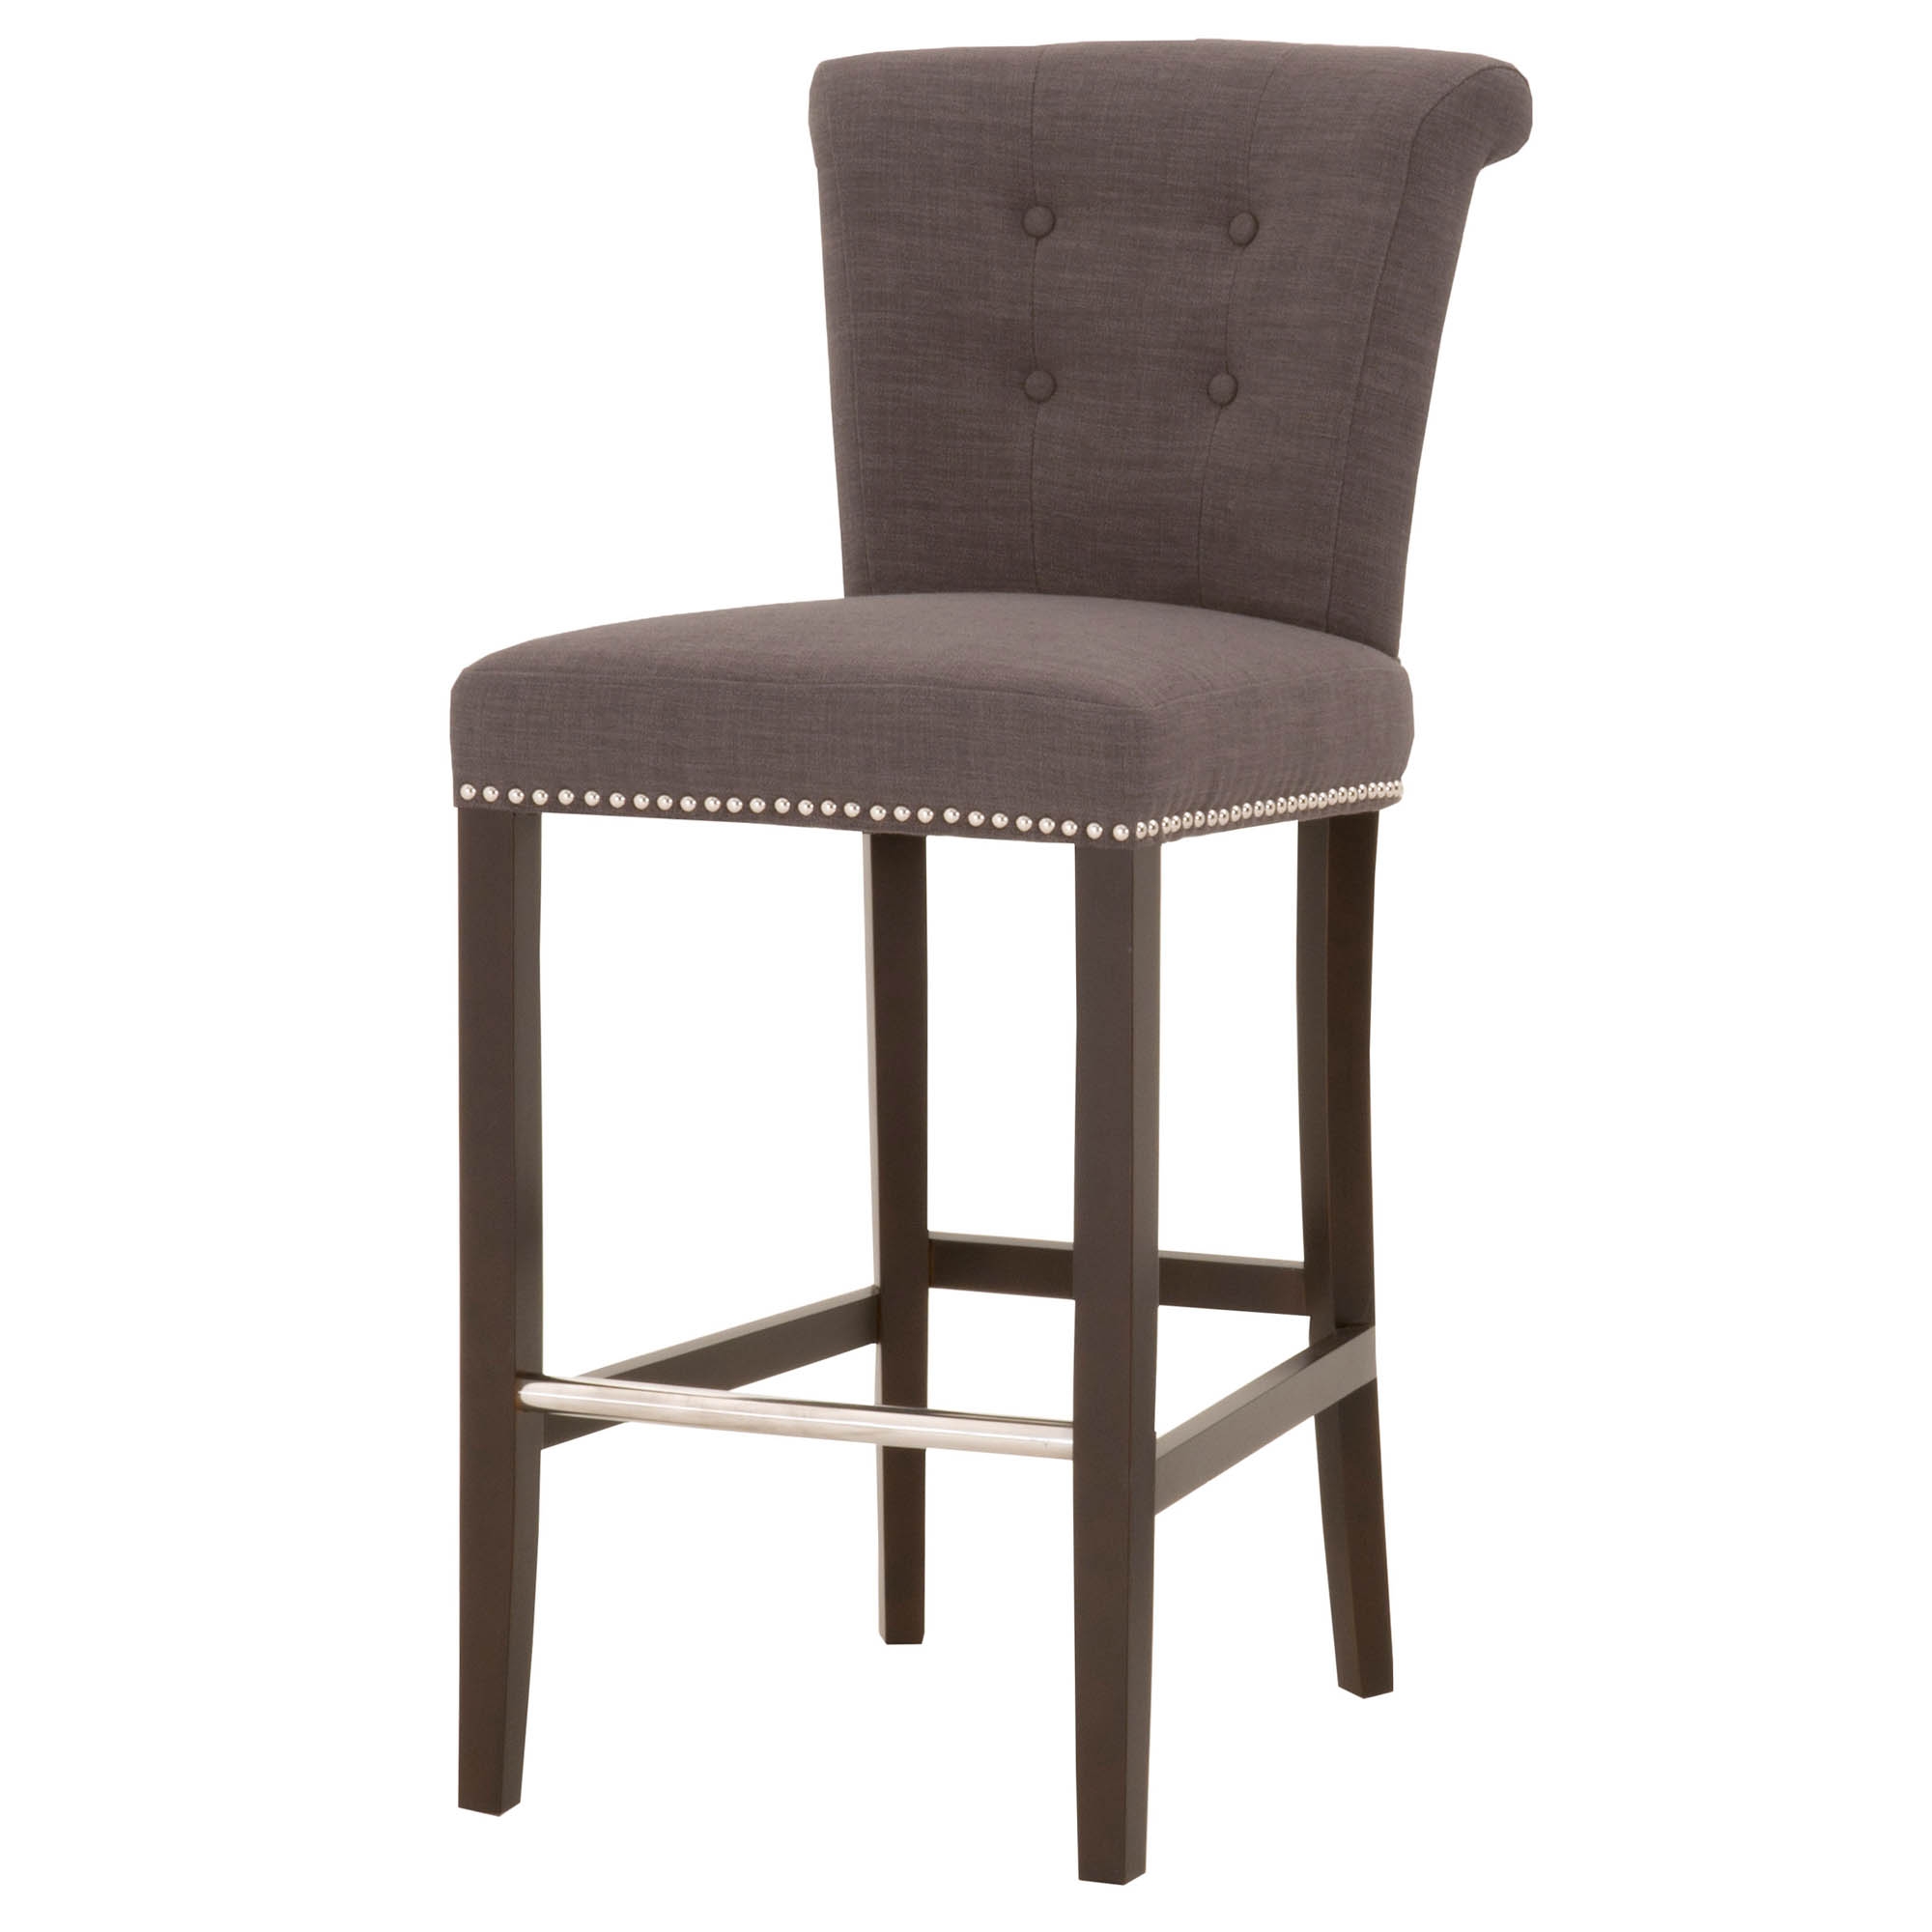 Luxe Barstool - Image 1